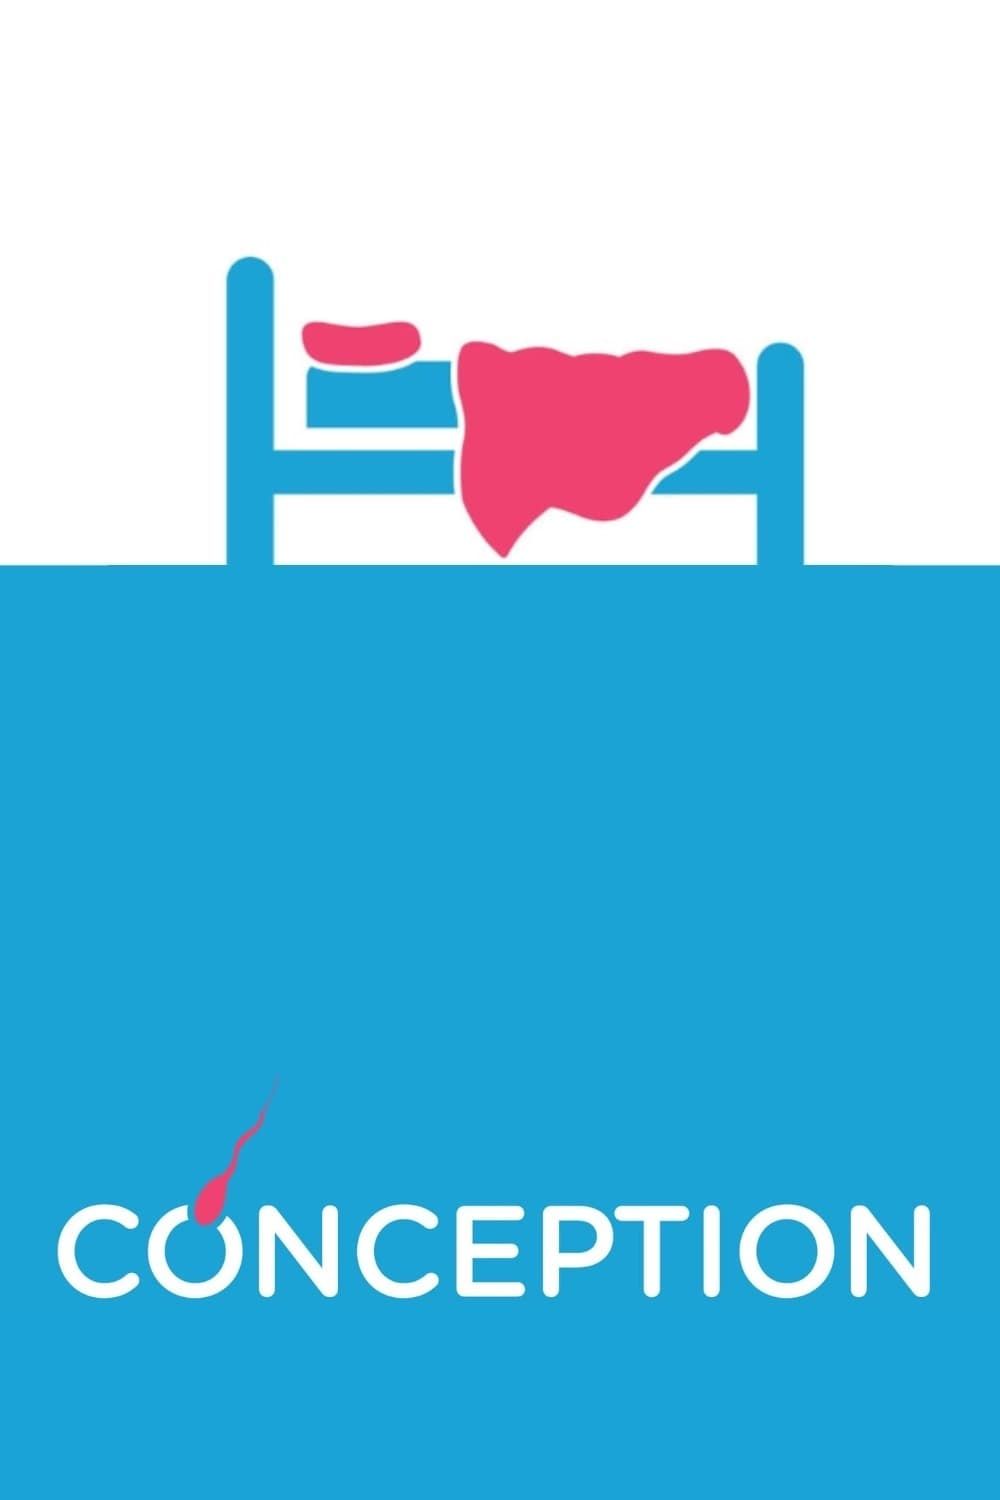 Watch Conception season 1 episode 3 streaming online